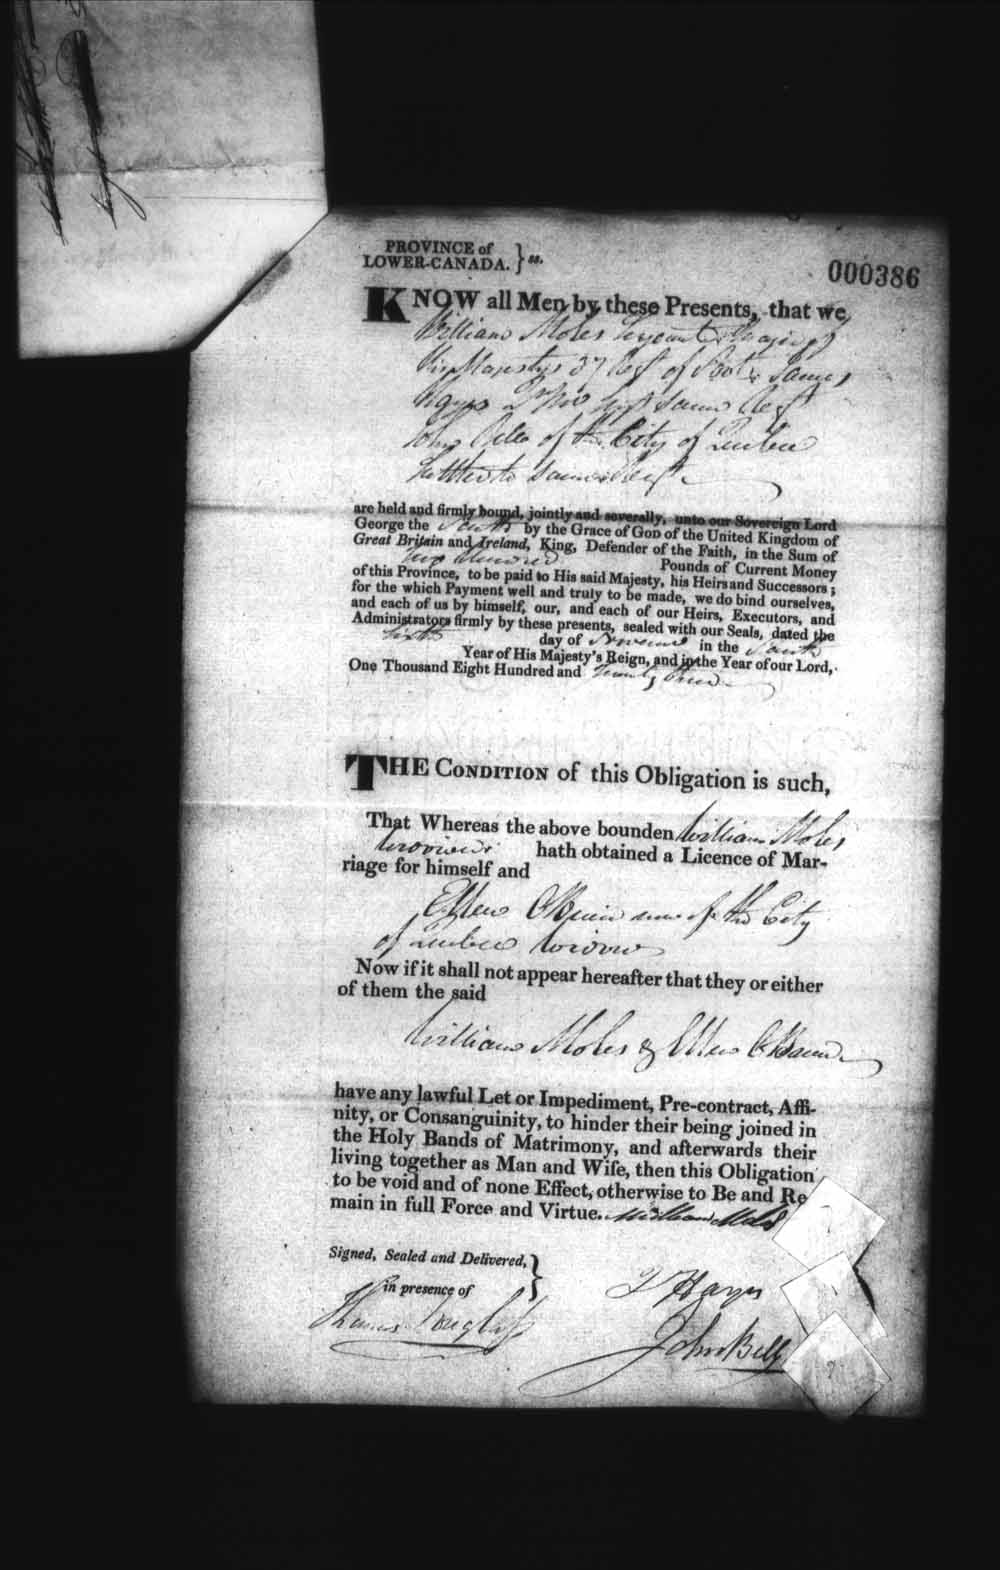 Digitized page of Upper and Lower Canada Marriage Bonds (1779-1865) for Image No.: e008236280